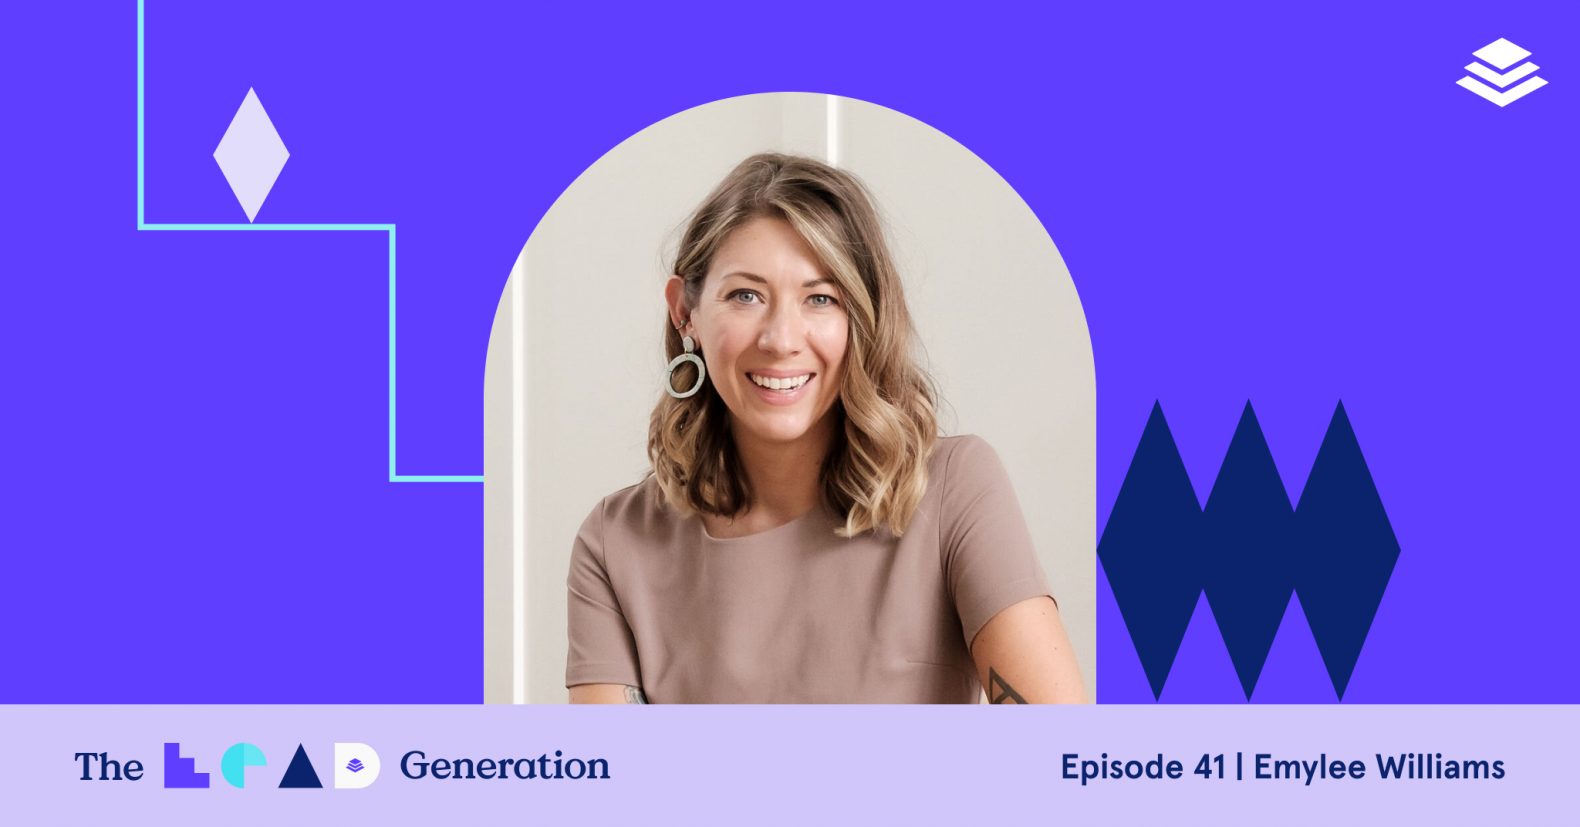 The Lead Generation Podcast Episode 41: Emylee Williams